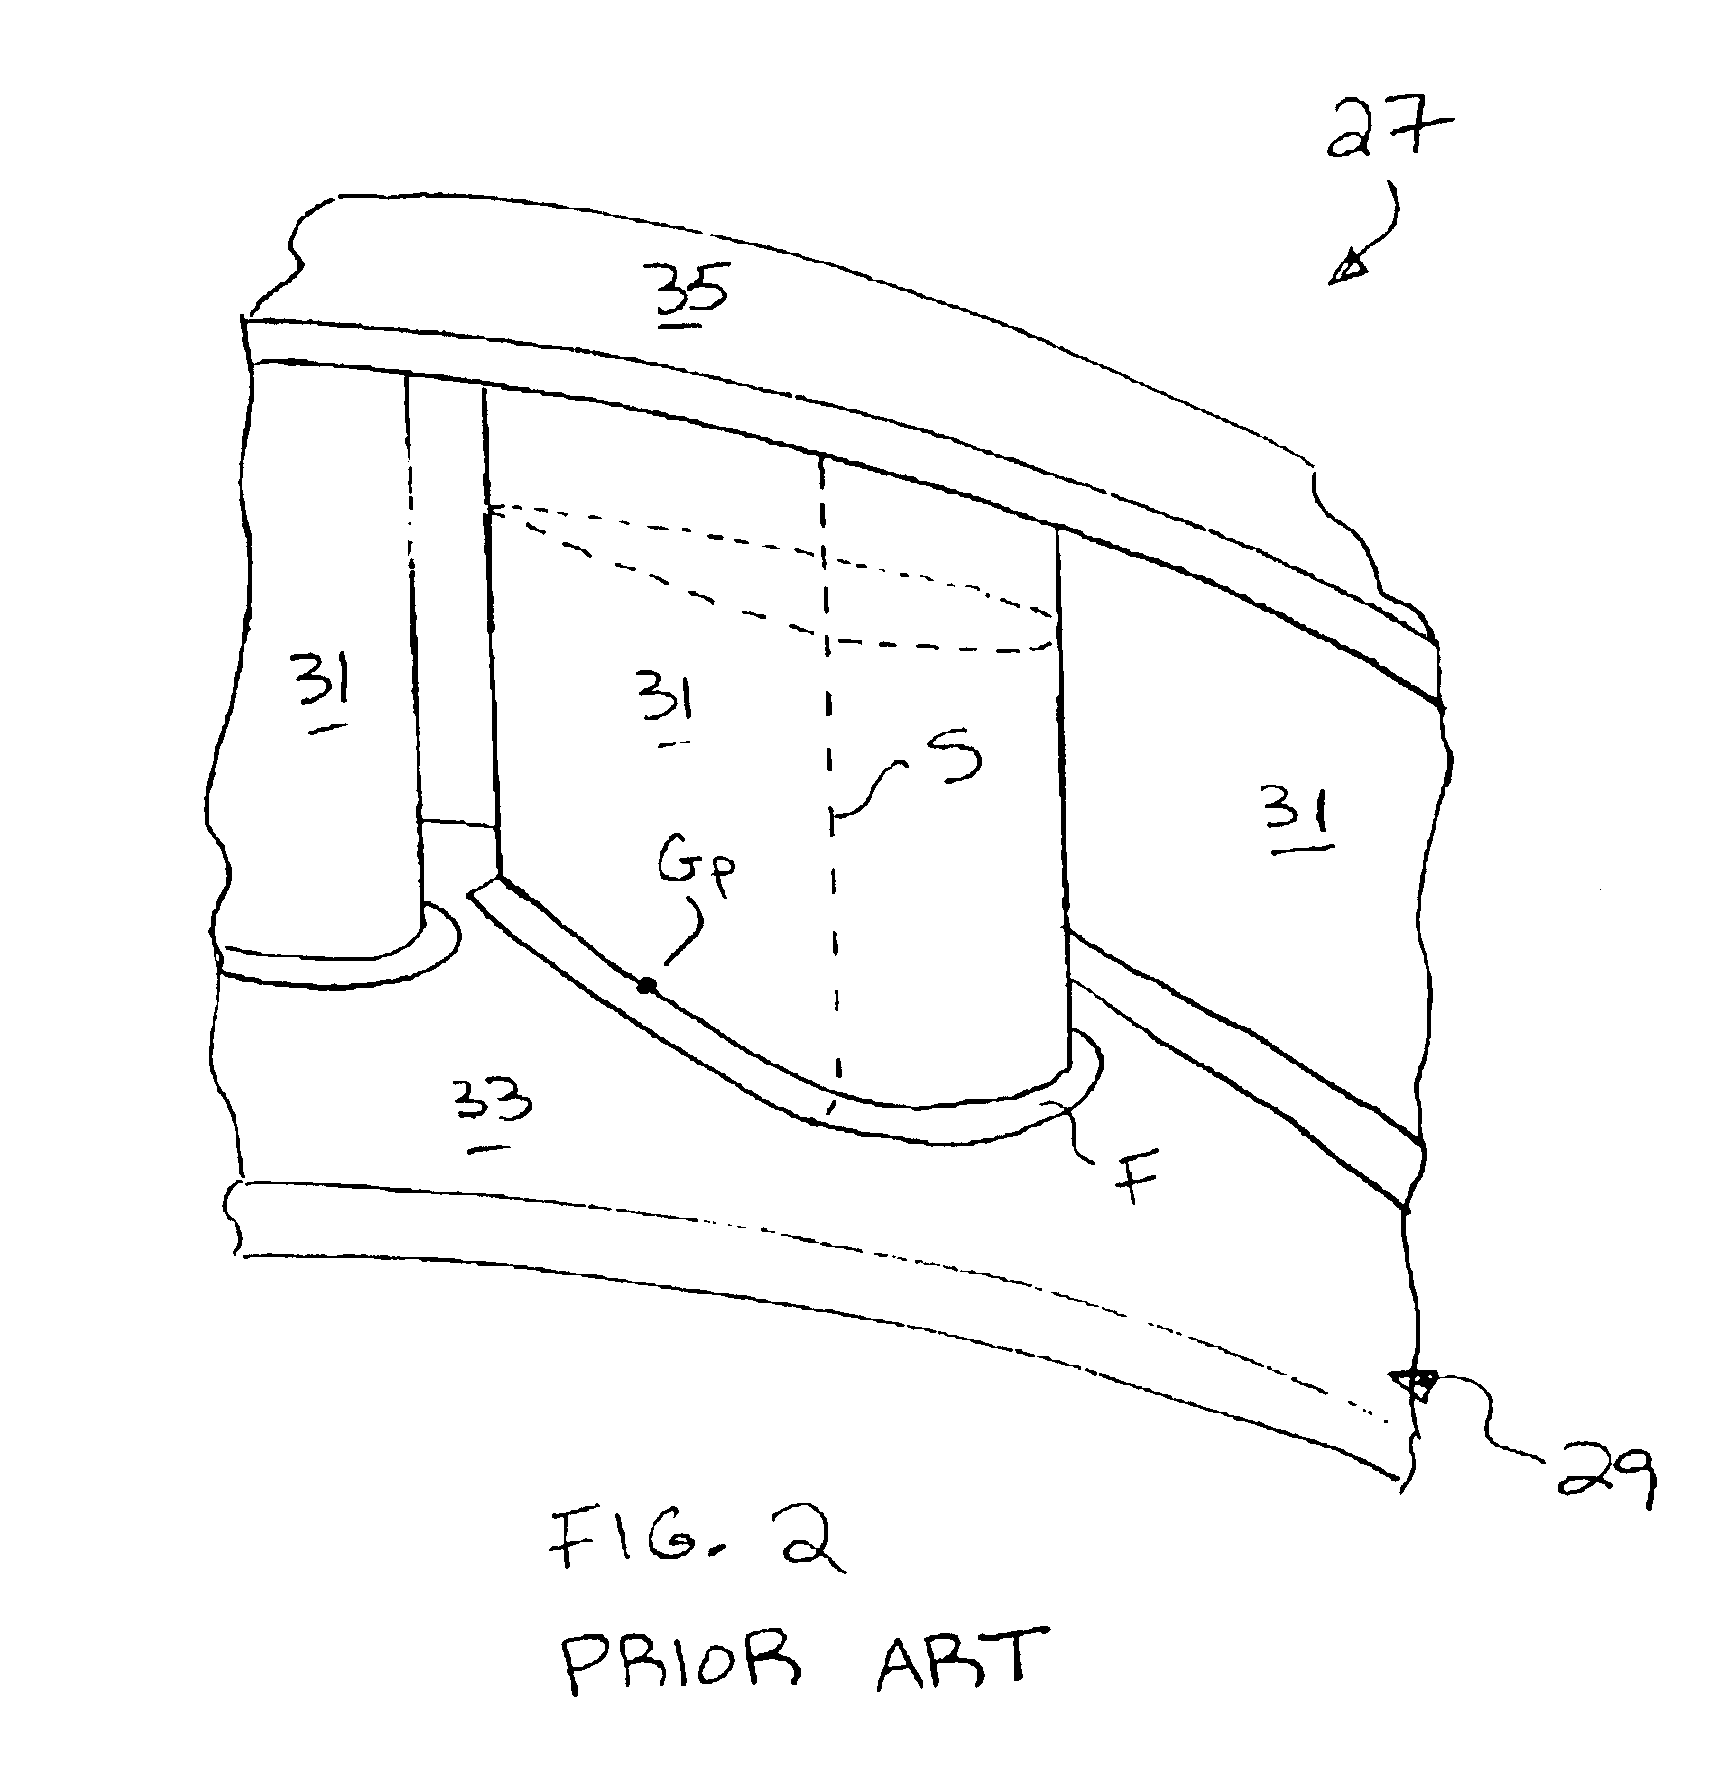 Flow directing device